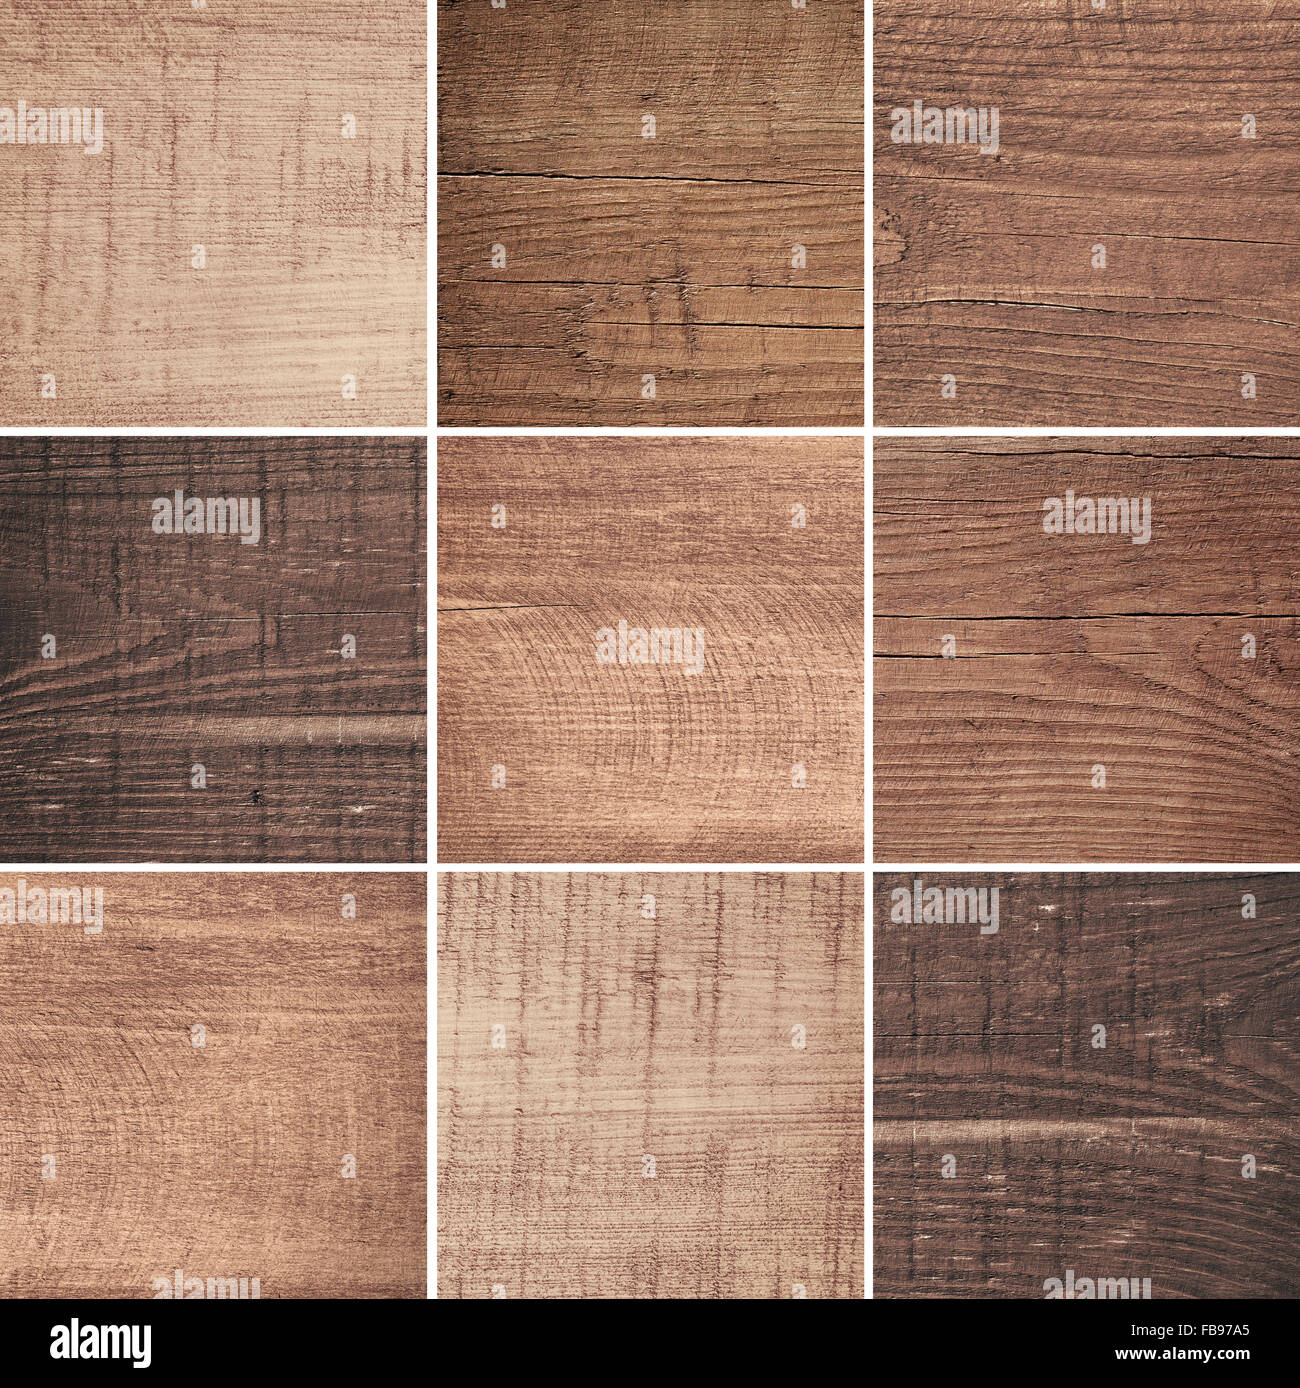 Set of different brown wood texture, cutting boards Stock Photo